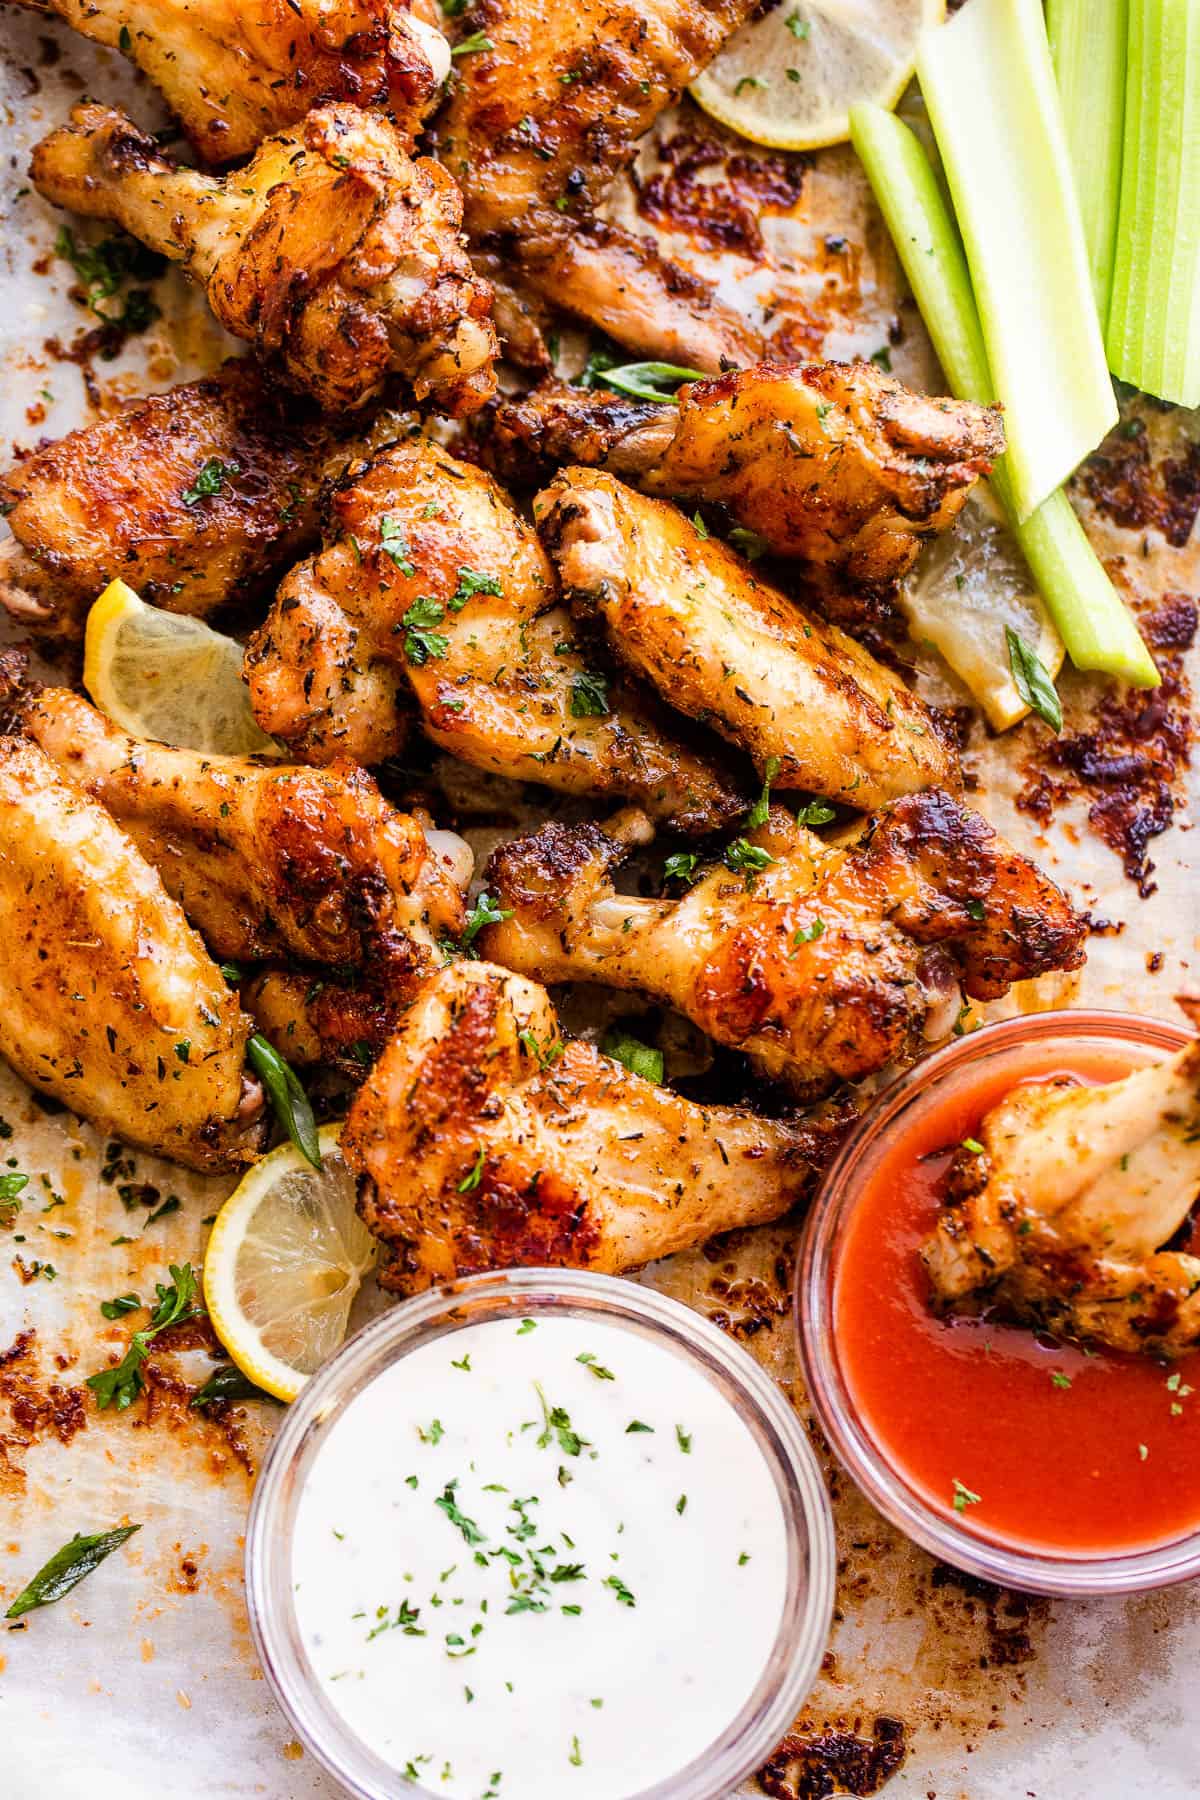 chicken wings on a platter served with sriracha sauce, ranch, and celery sticks.